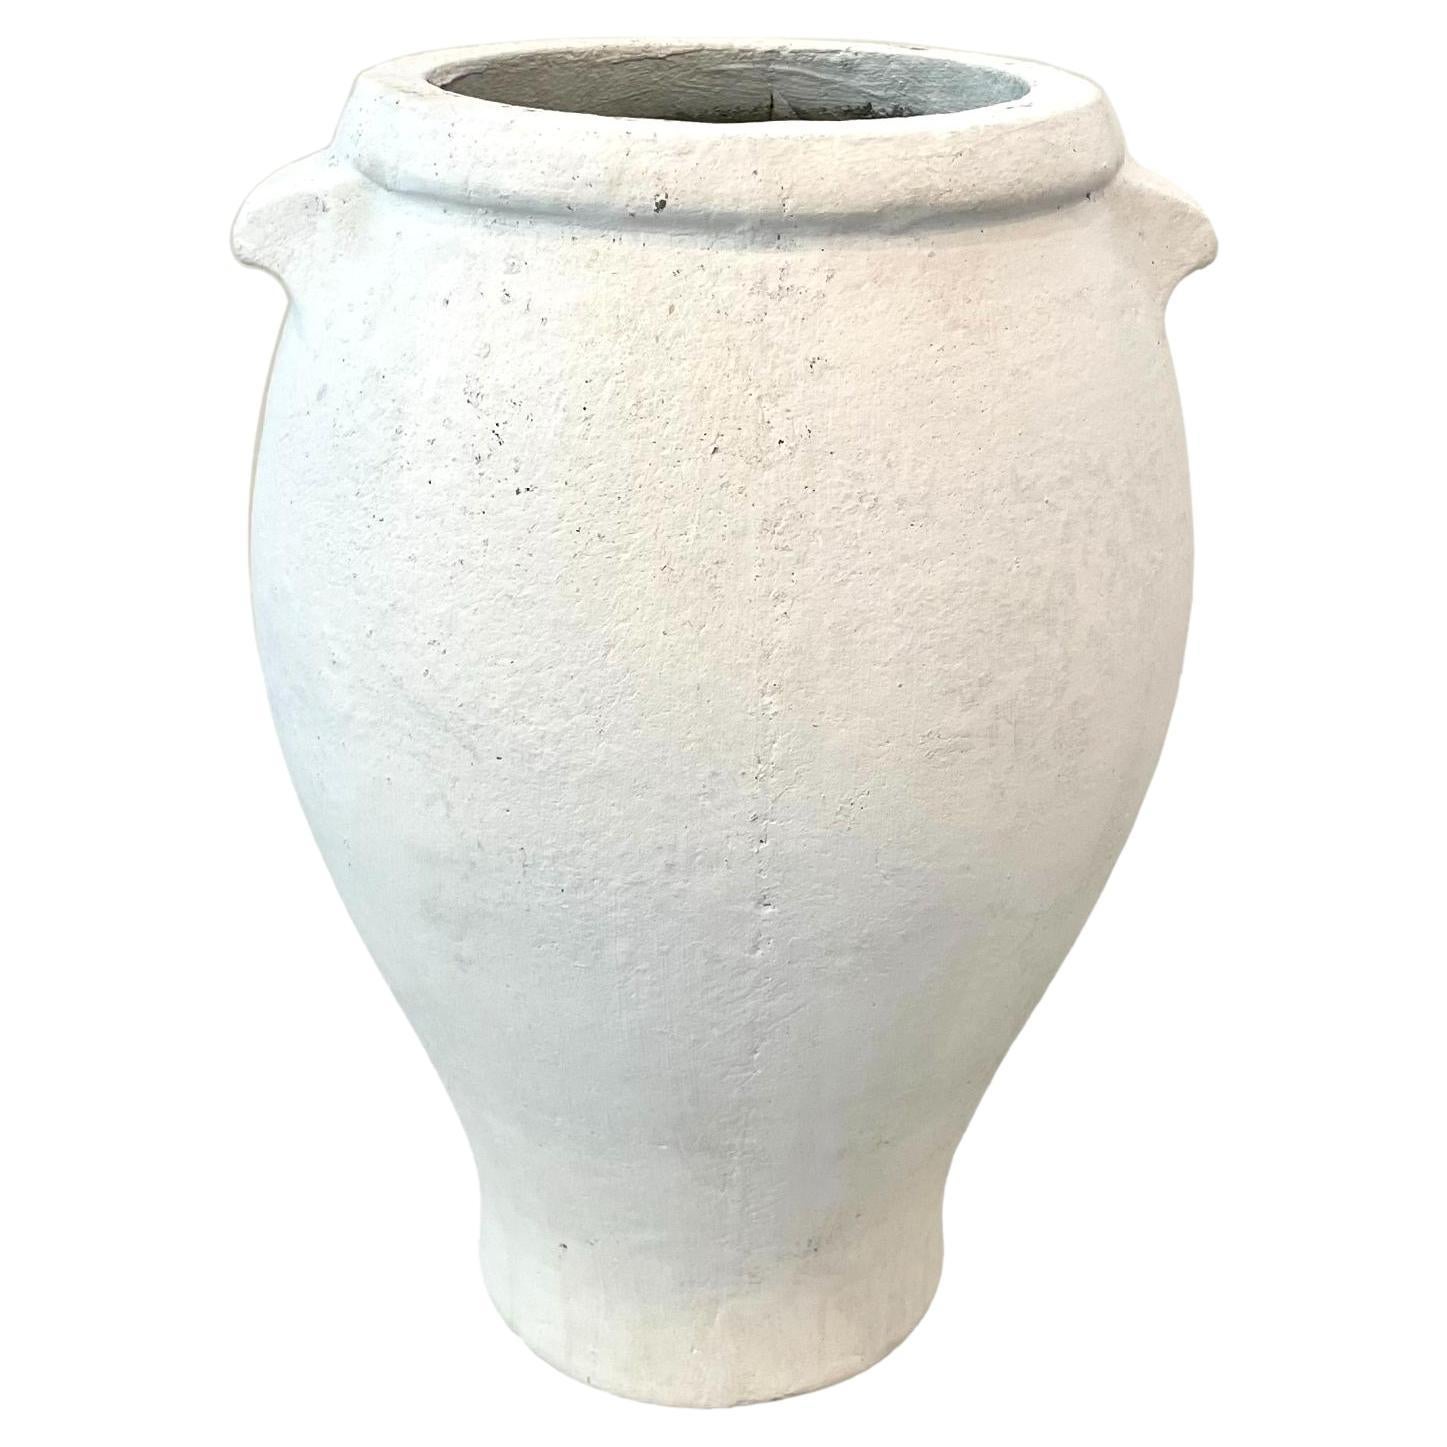 Willy Guhl Concrete Urn with Handles, 1960s Switzerland For Sale